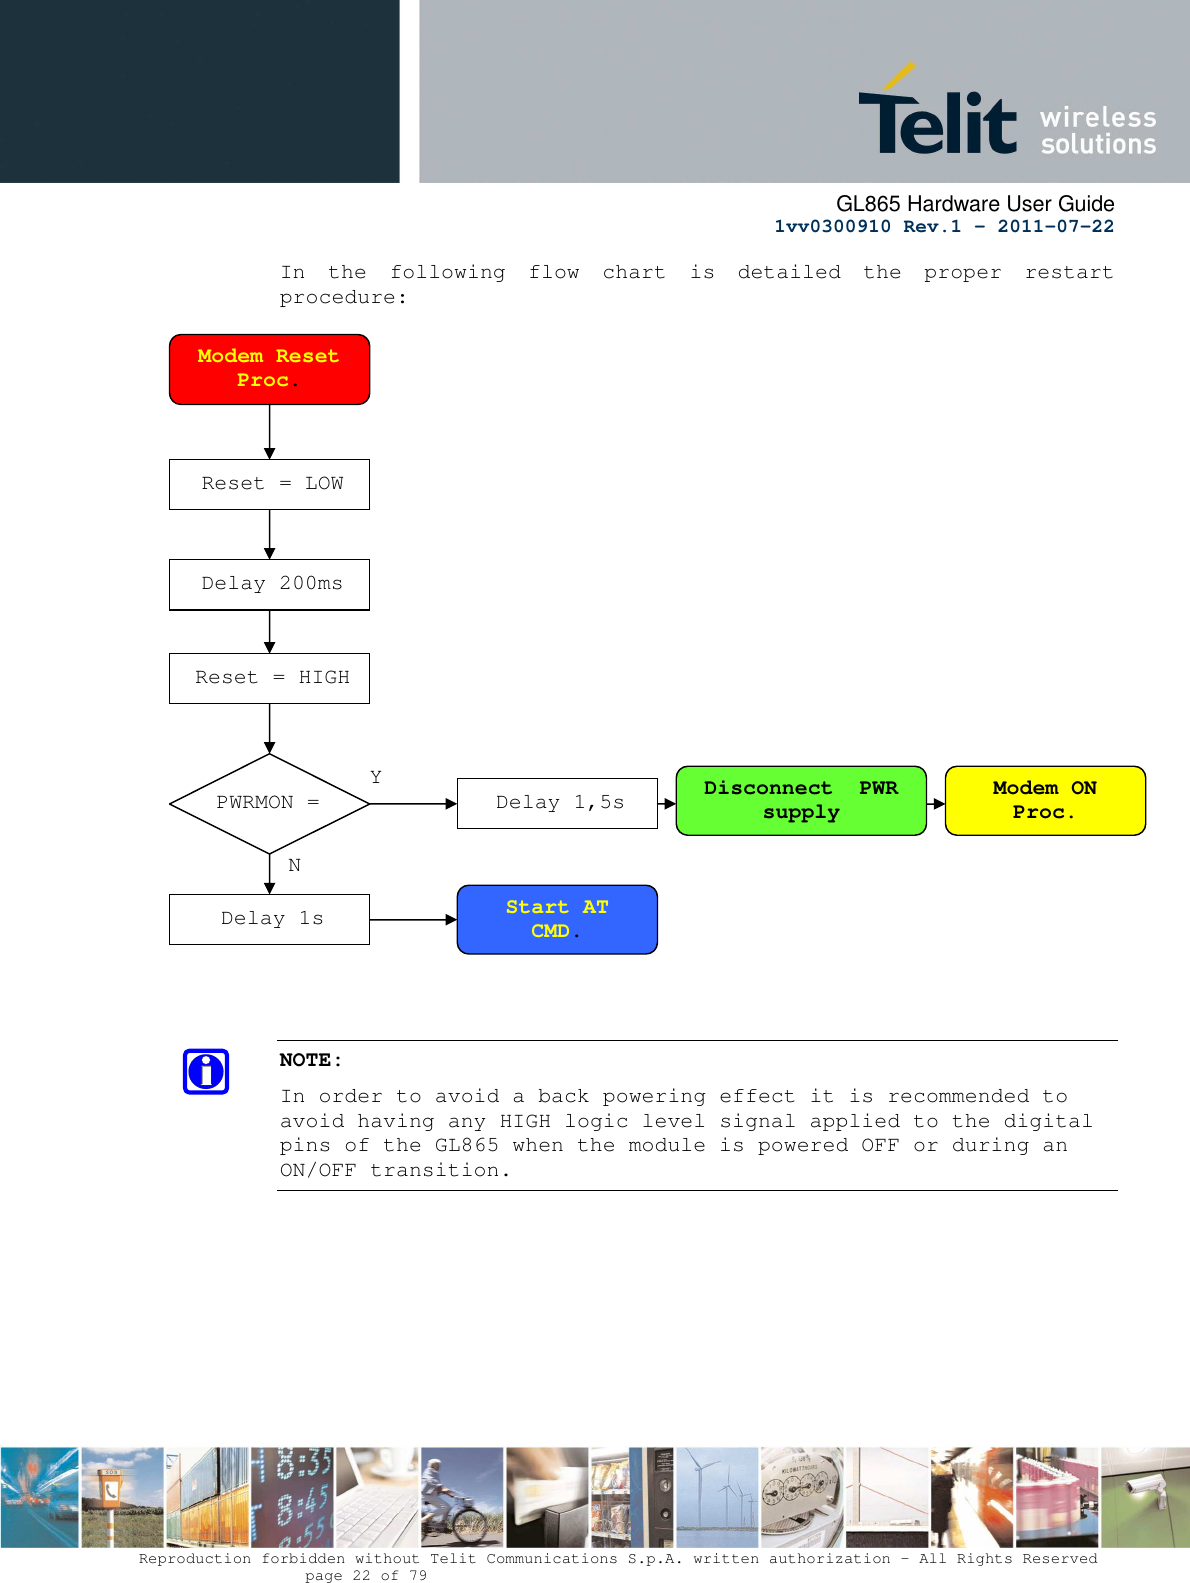      GL865 Hardware User Guide     1vv0300910 Rev.1 – 2011-07-22       Reproduction forbidden without Telit Communications S.p.A. written authorization - All Rights Reserved    page 22 of 79  In  the  following  flow  chart  is  detailed  the  proper  restart procedure:      NOTE: In order to avoid a back powering effect it is recommended to avoid having any HIGH logic level signal applied to the digital pins of the GL865 when the module is powered OFF or during an ON/OFF transition. Modem Reset Proc. Reset = LOW Delay 200ms Reset = HIGH PWRMON = OFF   Delay 1s  Start AT CMD. Modem ON Proc. Delay 1,5s Y N Disconnect  PWR supply 